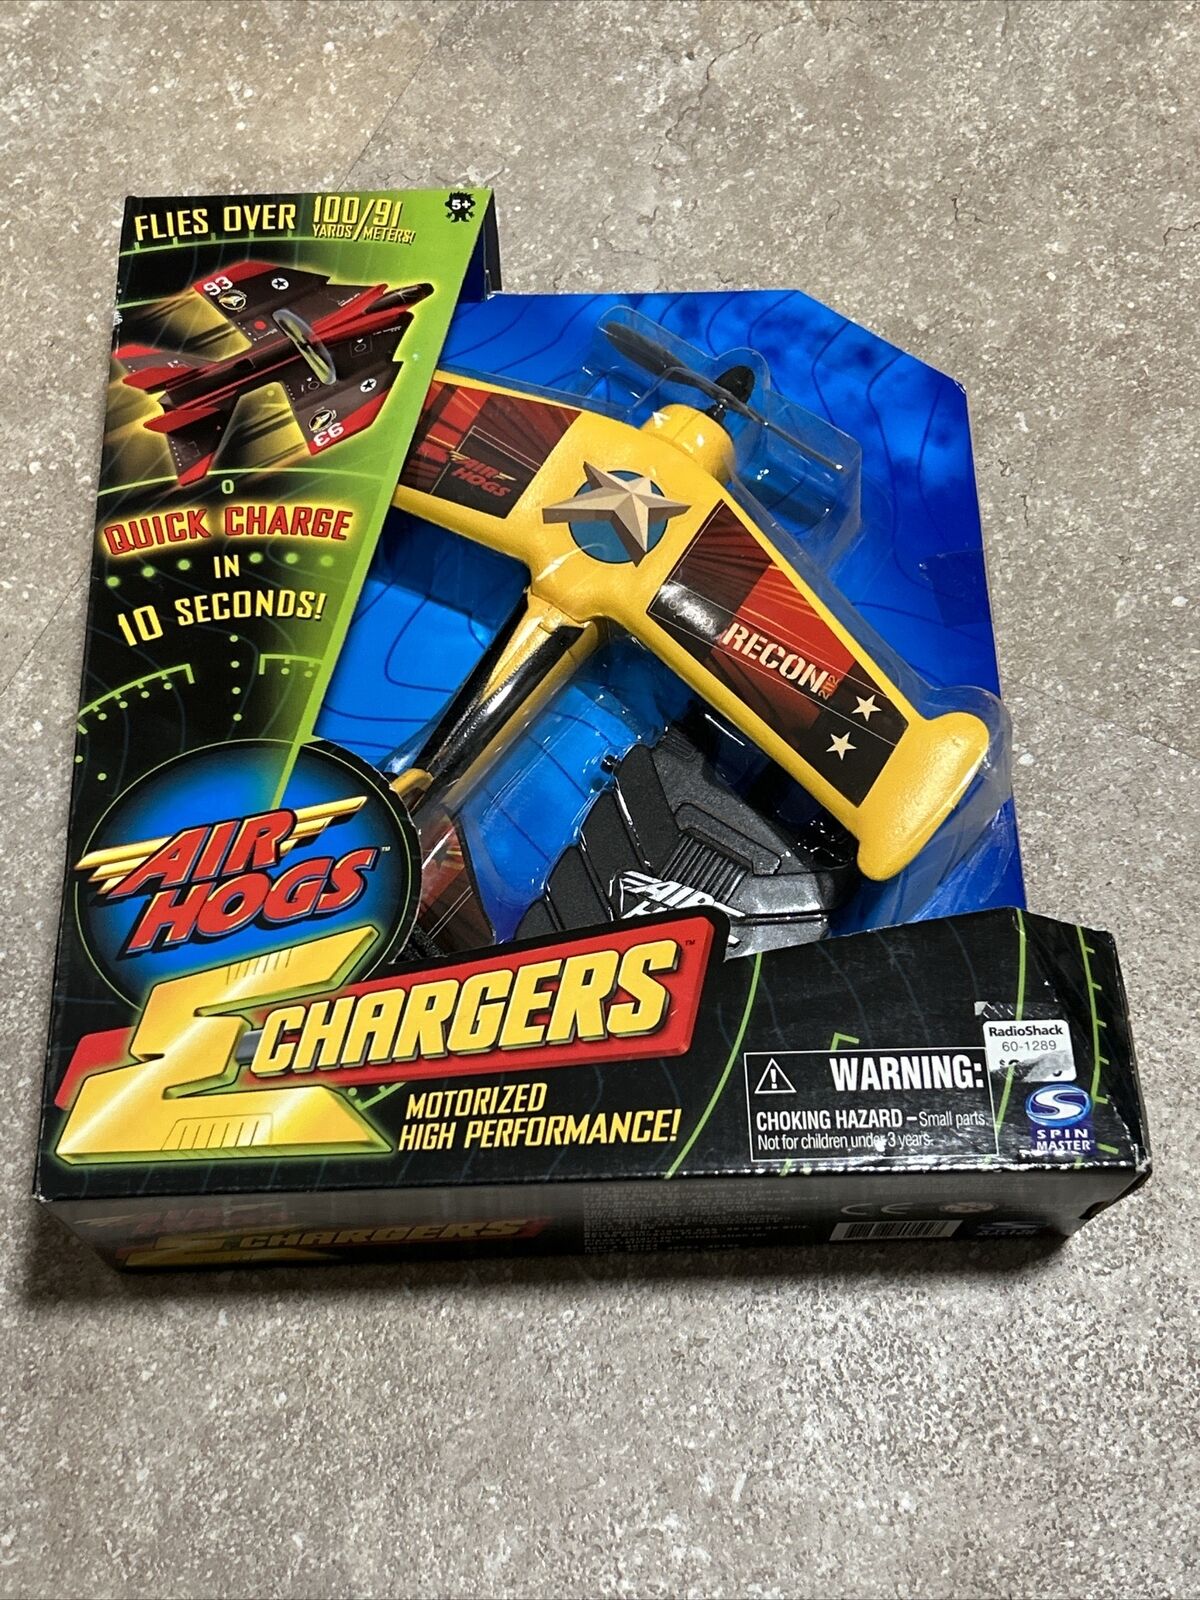 2005 Air Hogs E Chargers Toy Recon 2112 Airplane New In Box YELLOW AND BLACK